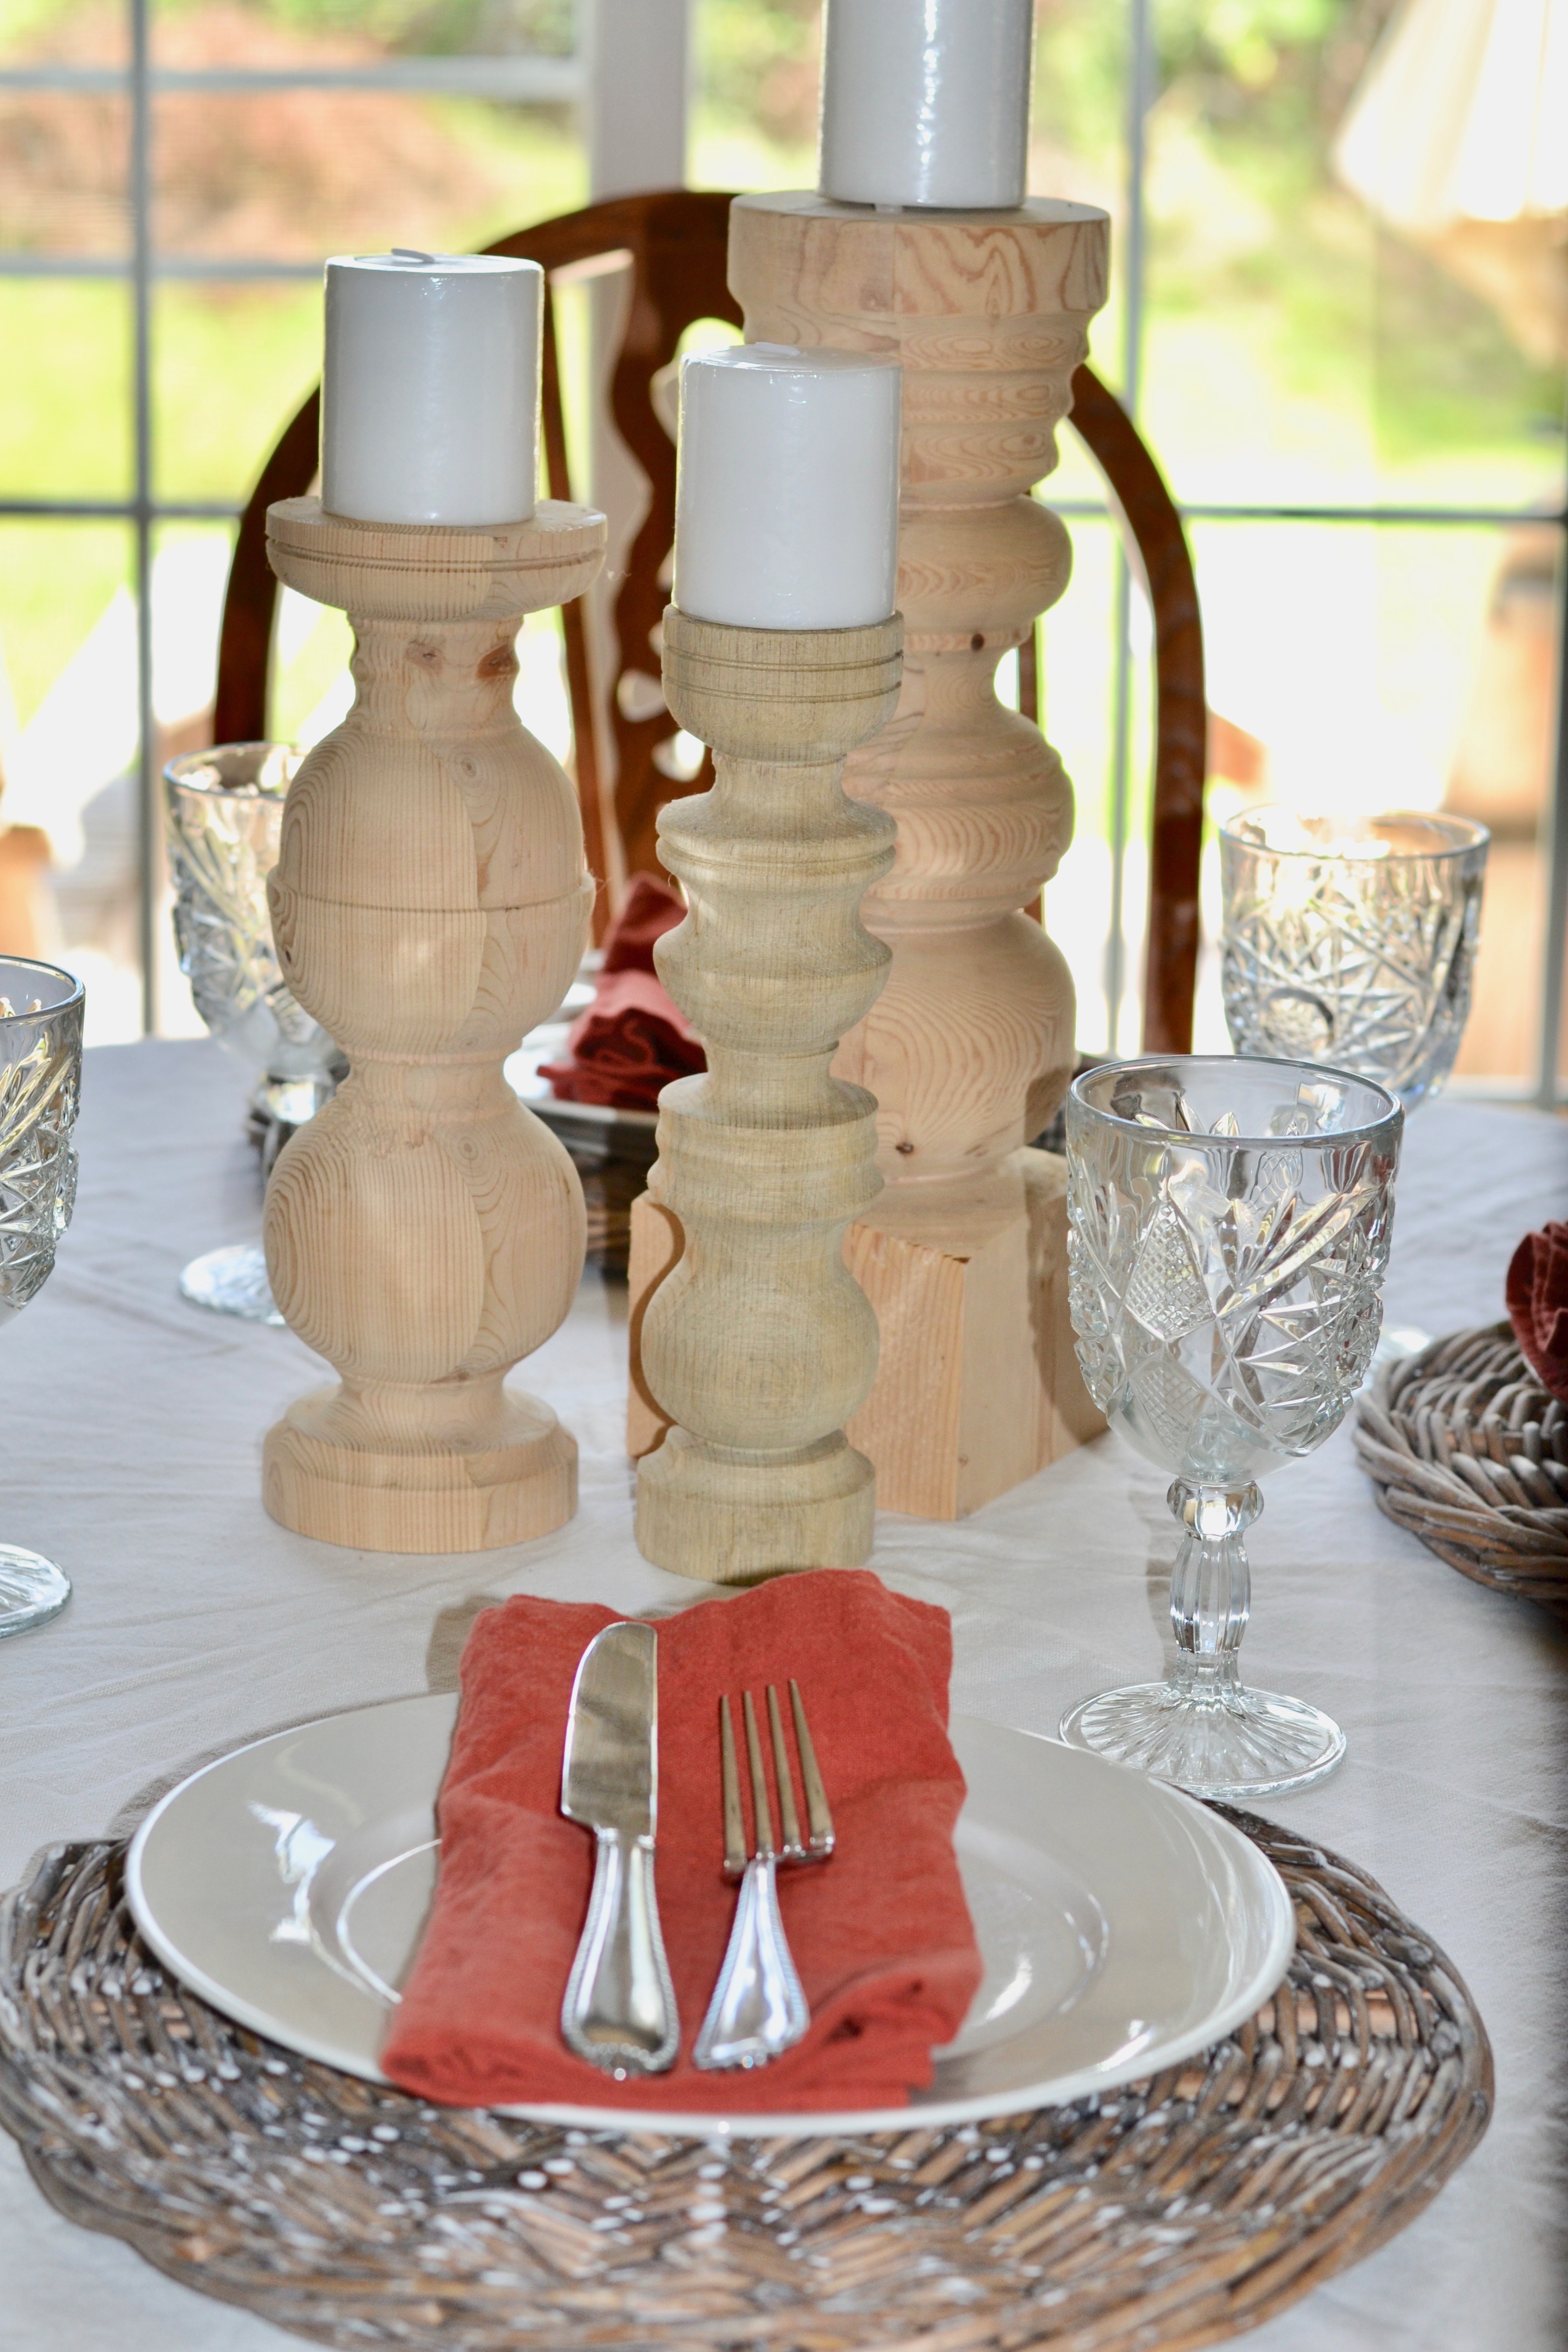 The small details of a tablescape